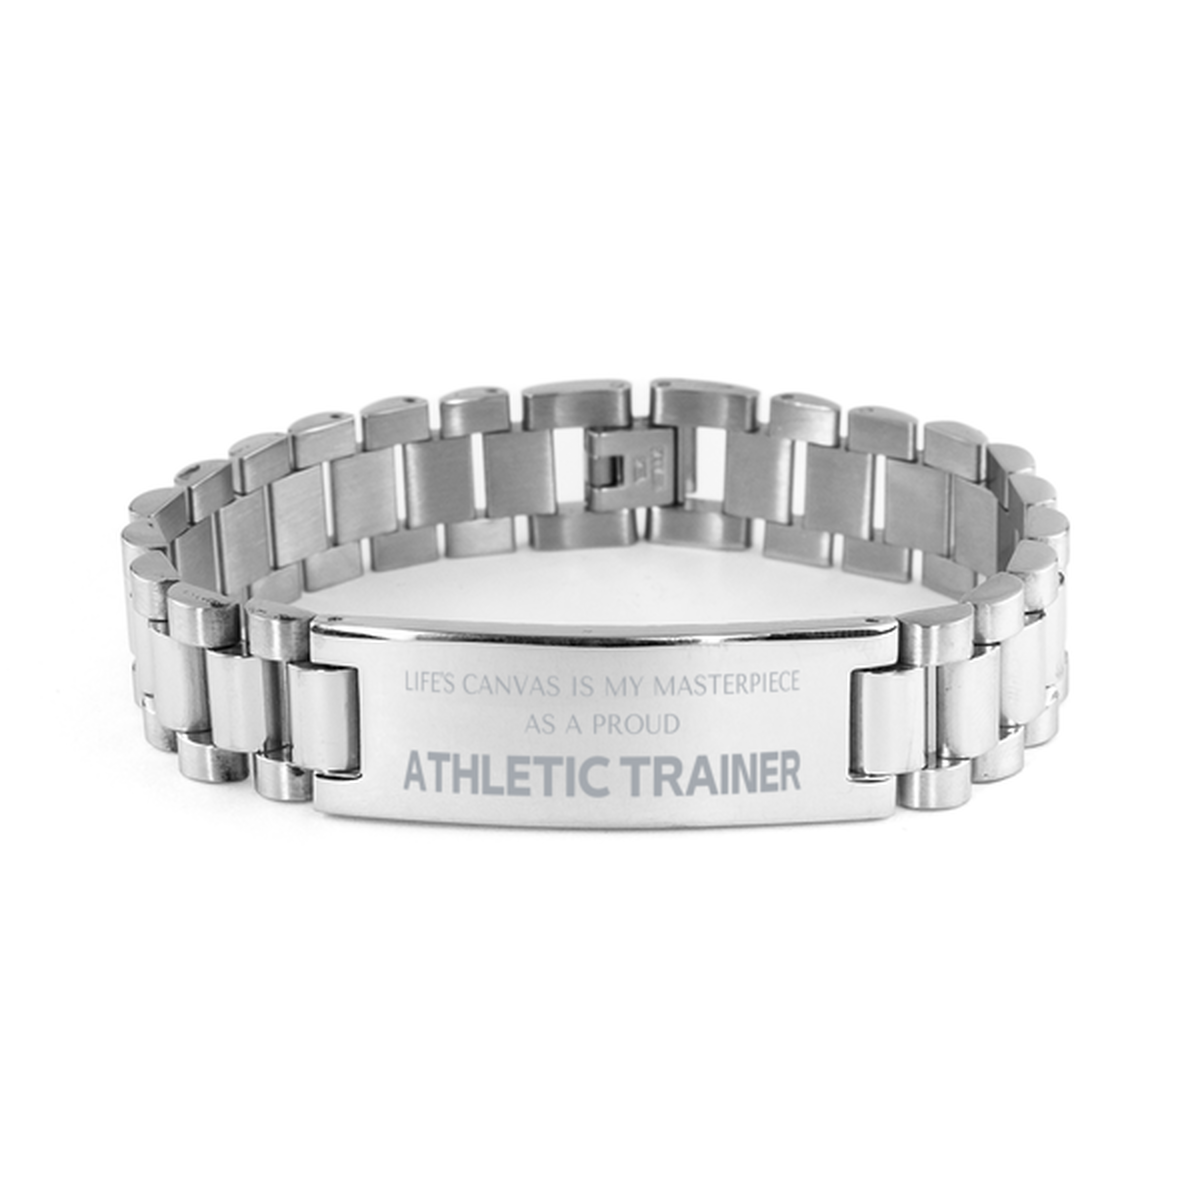 Proud Athletic Trainer Gifts, Life's canvas is my masterpiece, Epic Birthday Christmas Unique Ladder Stainless Steel Bracelet For Athletic Trainer, Coworkers, Men, Women, Friends